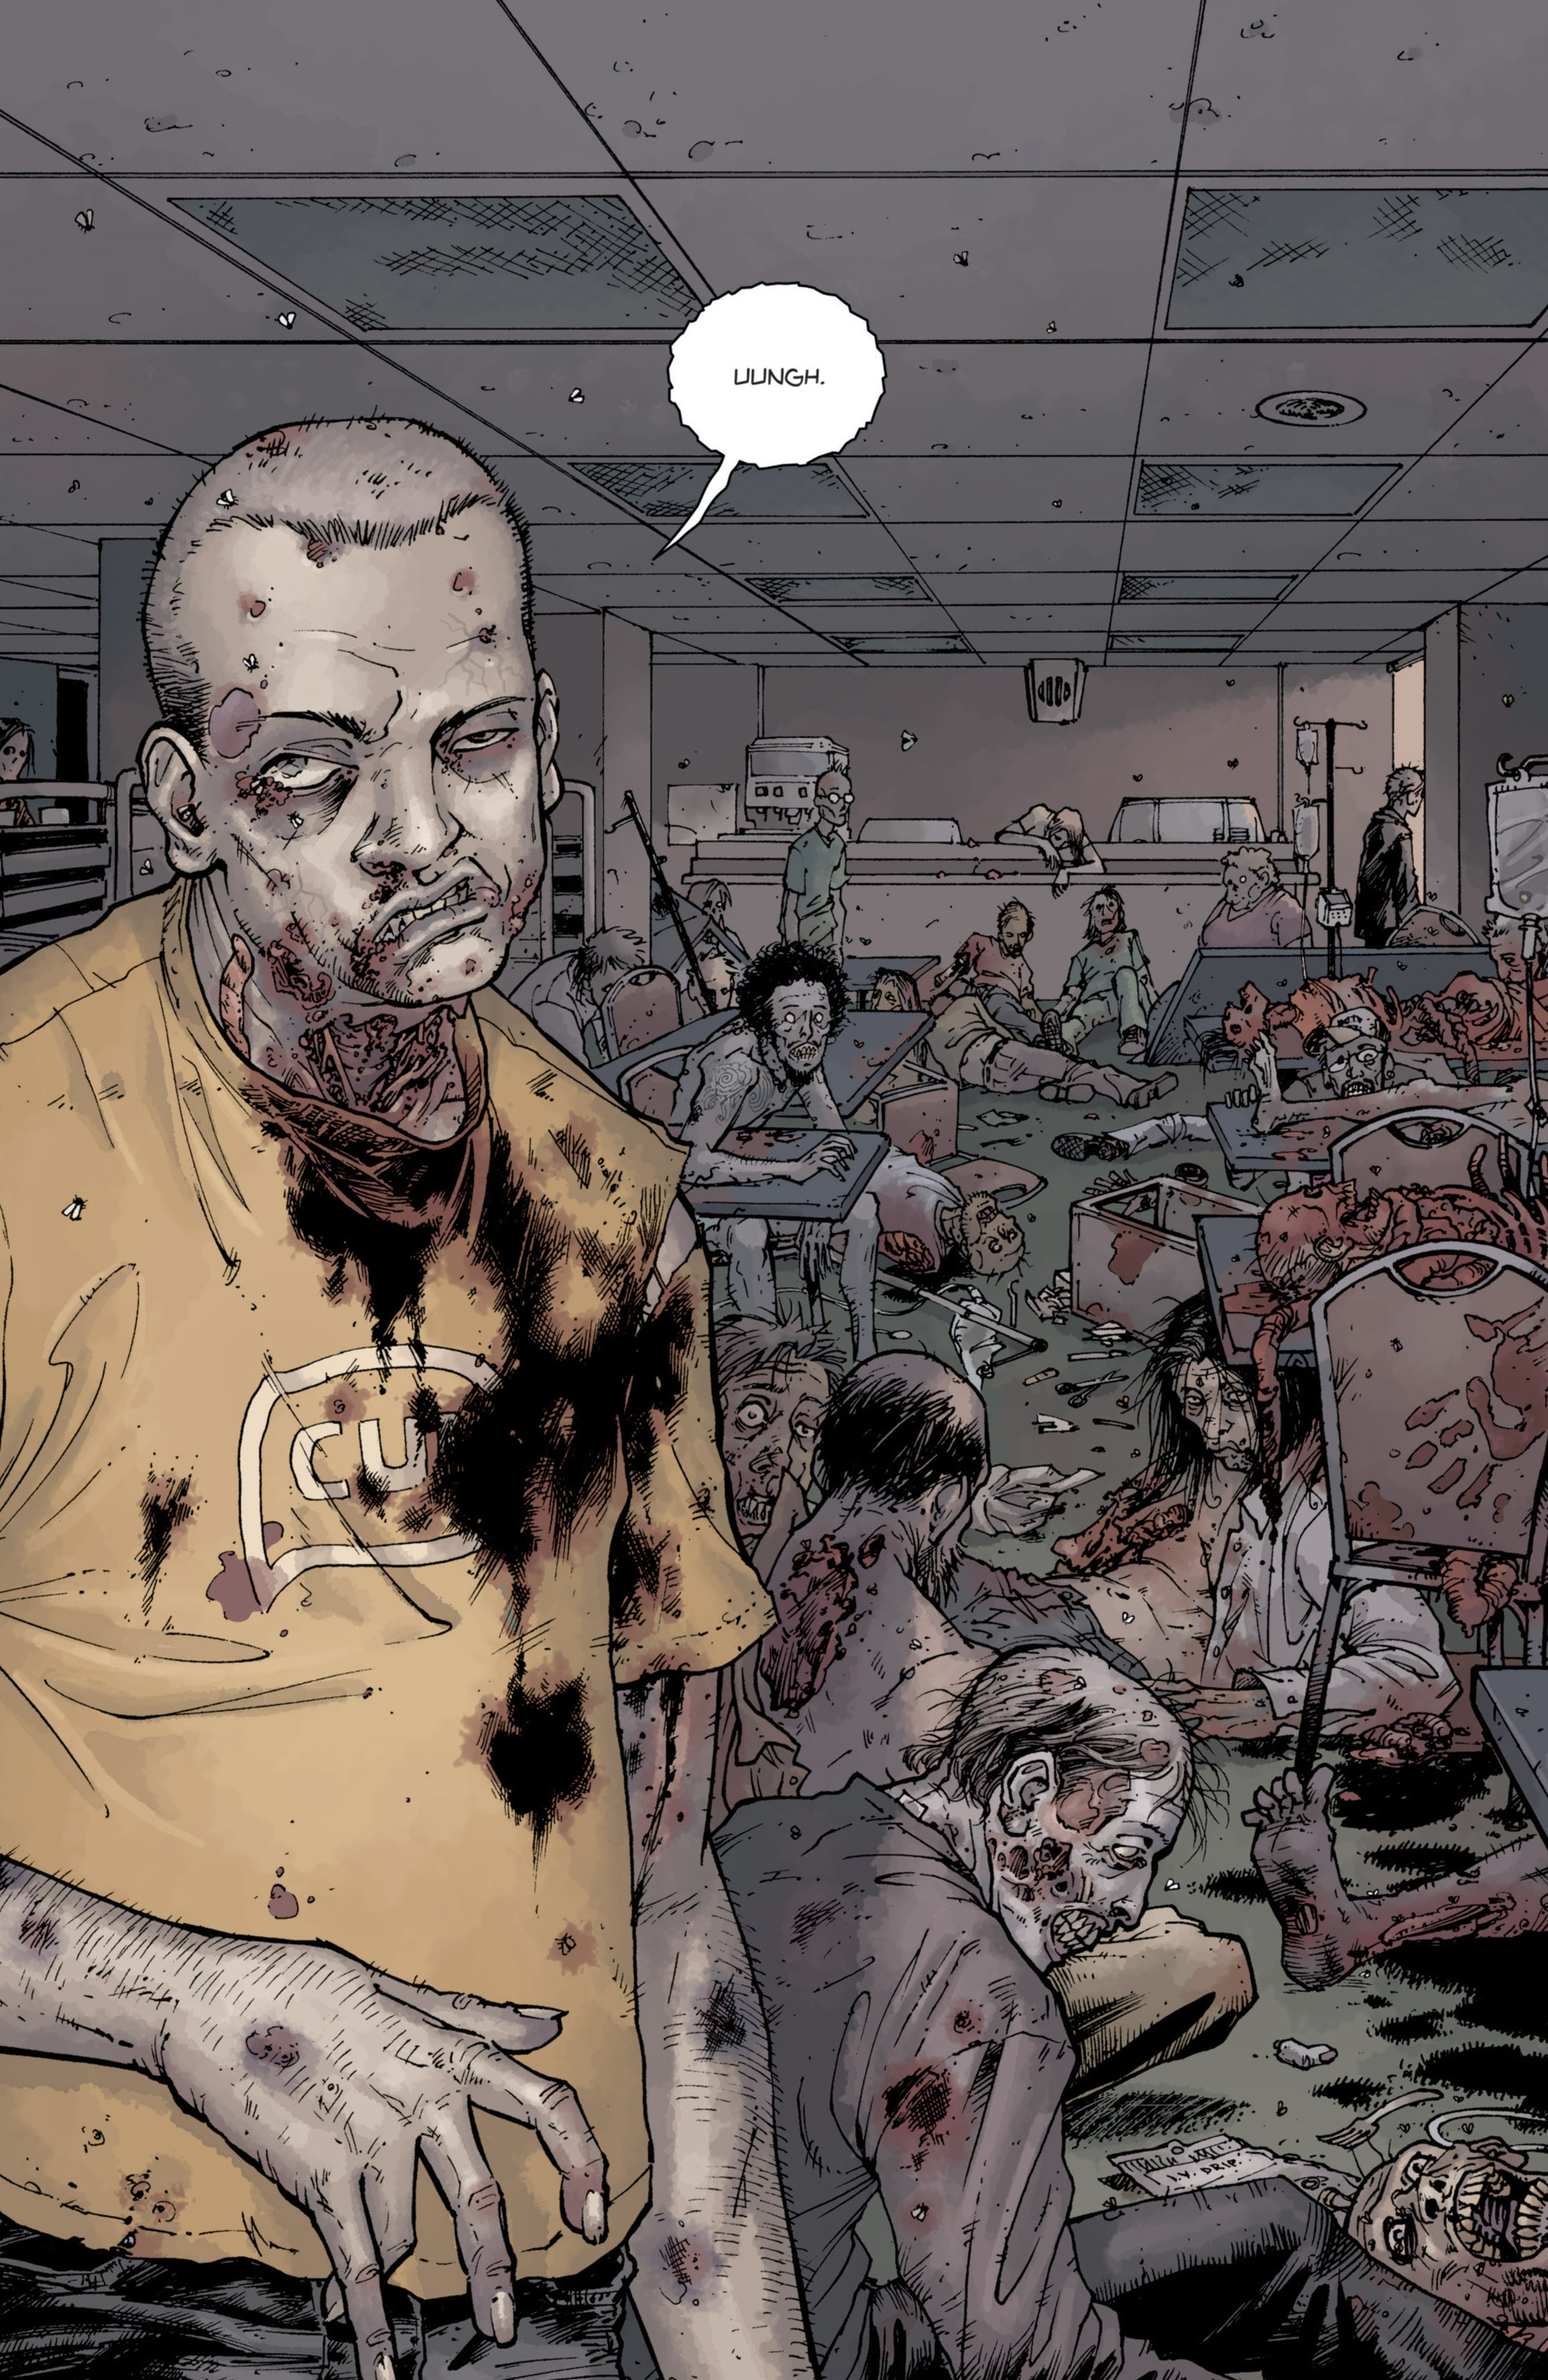 Read online The Walking Dead comic -  Issue # _Special - 1 - 10th Anniversary Edition - 8